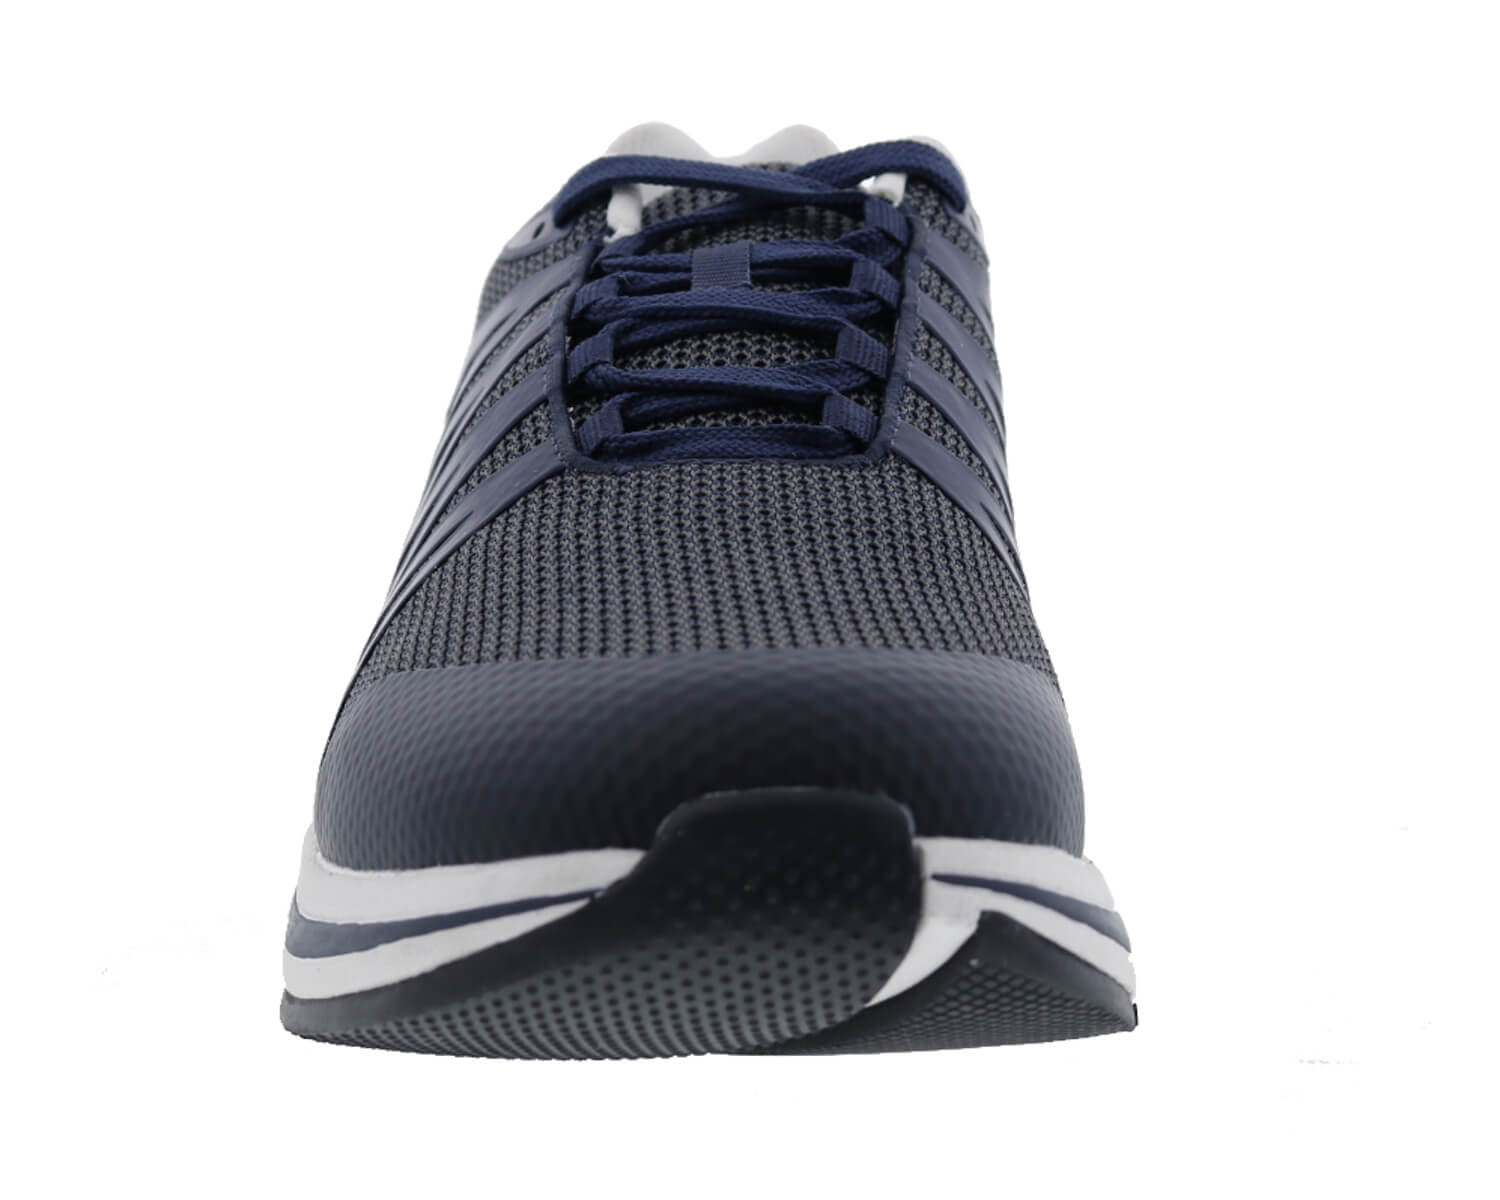 Drew Shoes Player 40105 Men's Athletic Shoe - Extra Wide